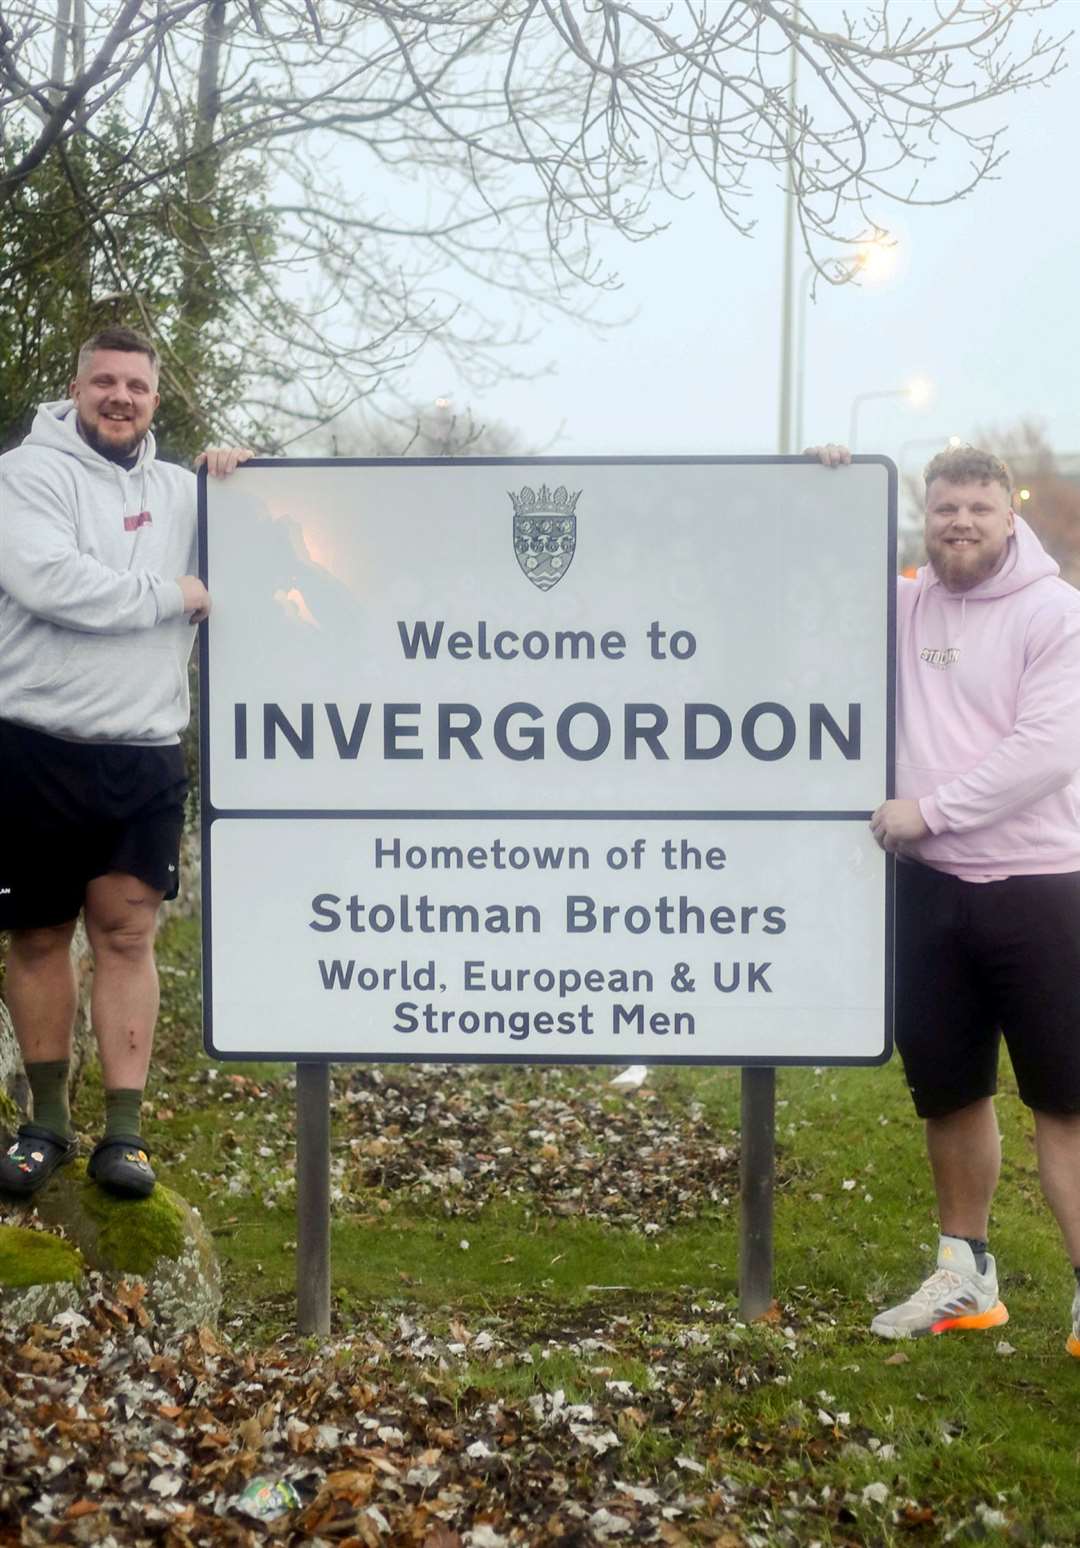 Luke and Tom Stoltman are no strangers to special welcome signs... Picture: James Mackenzie.